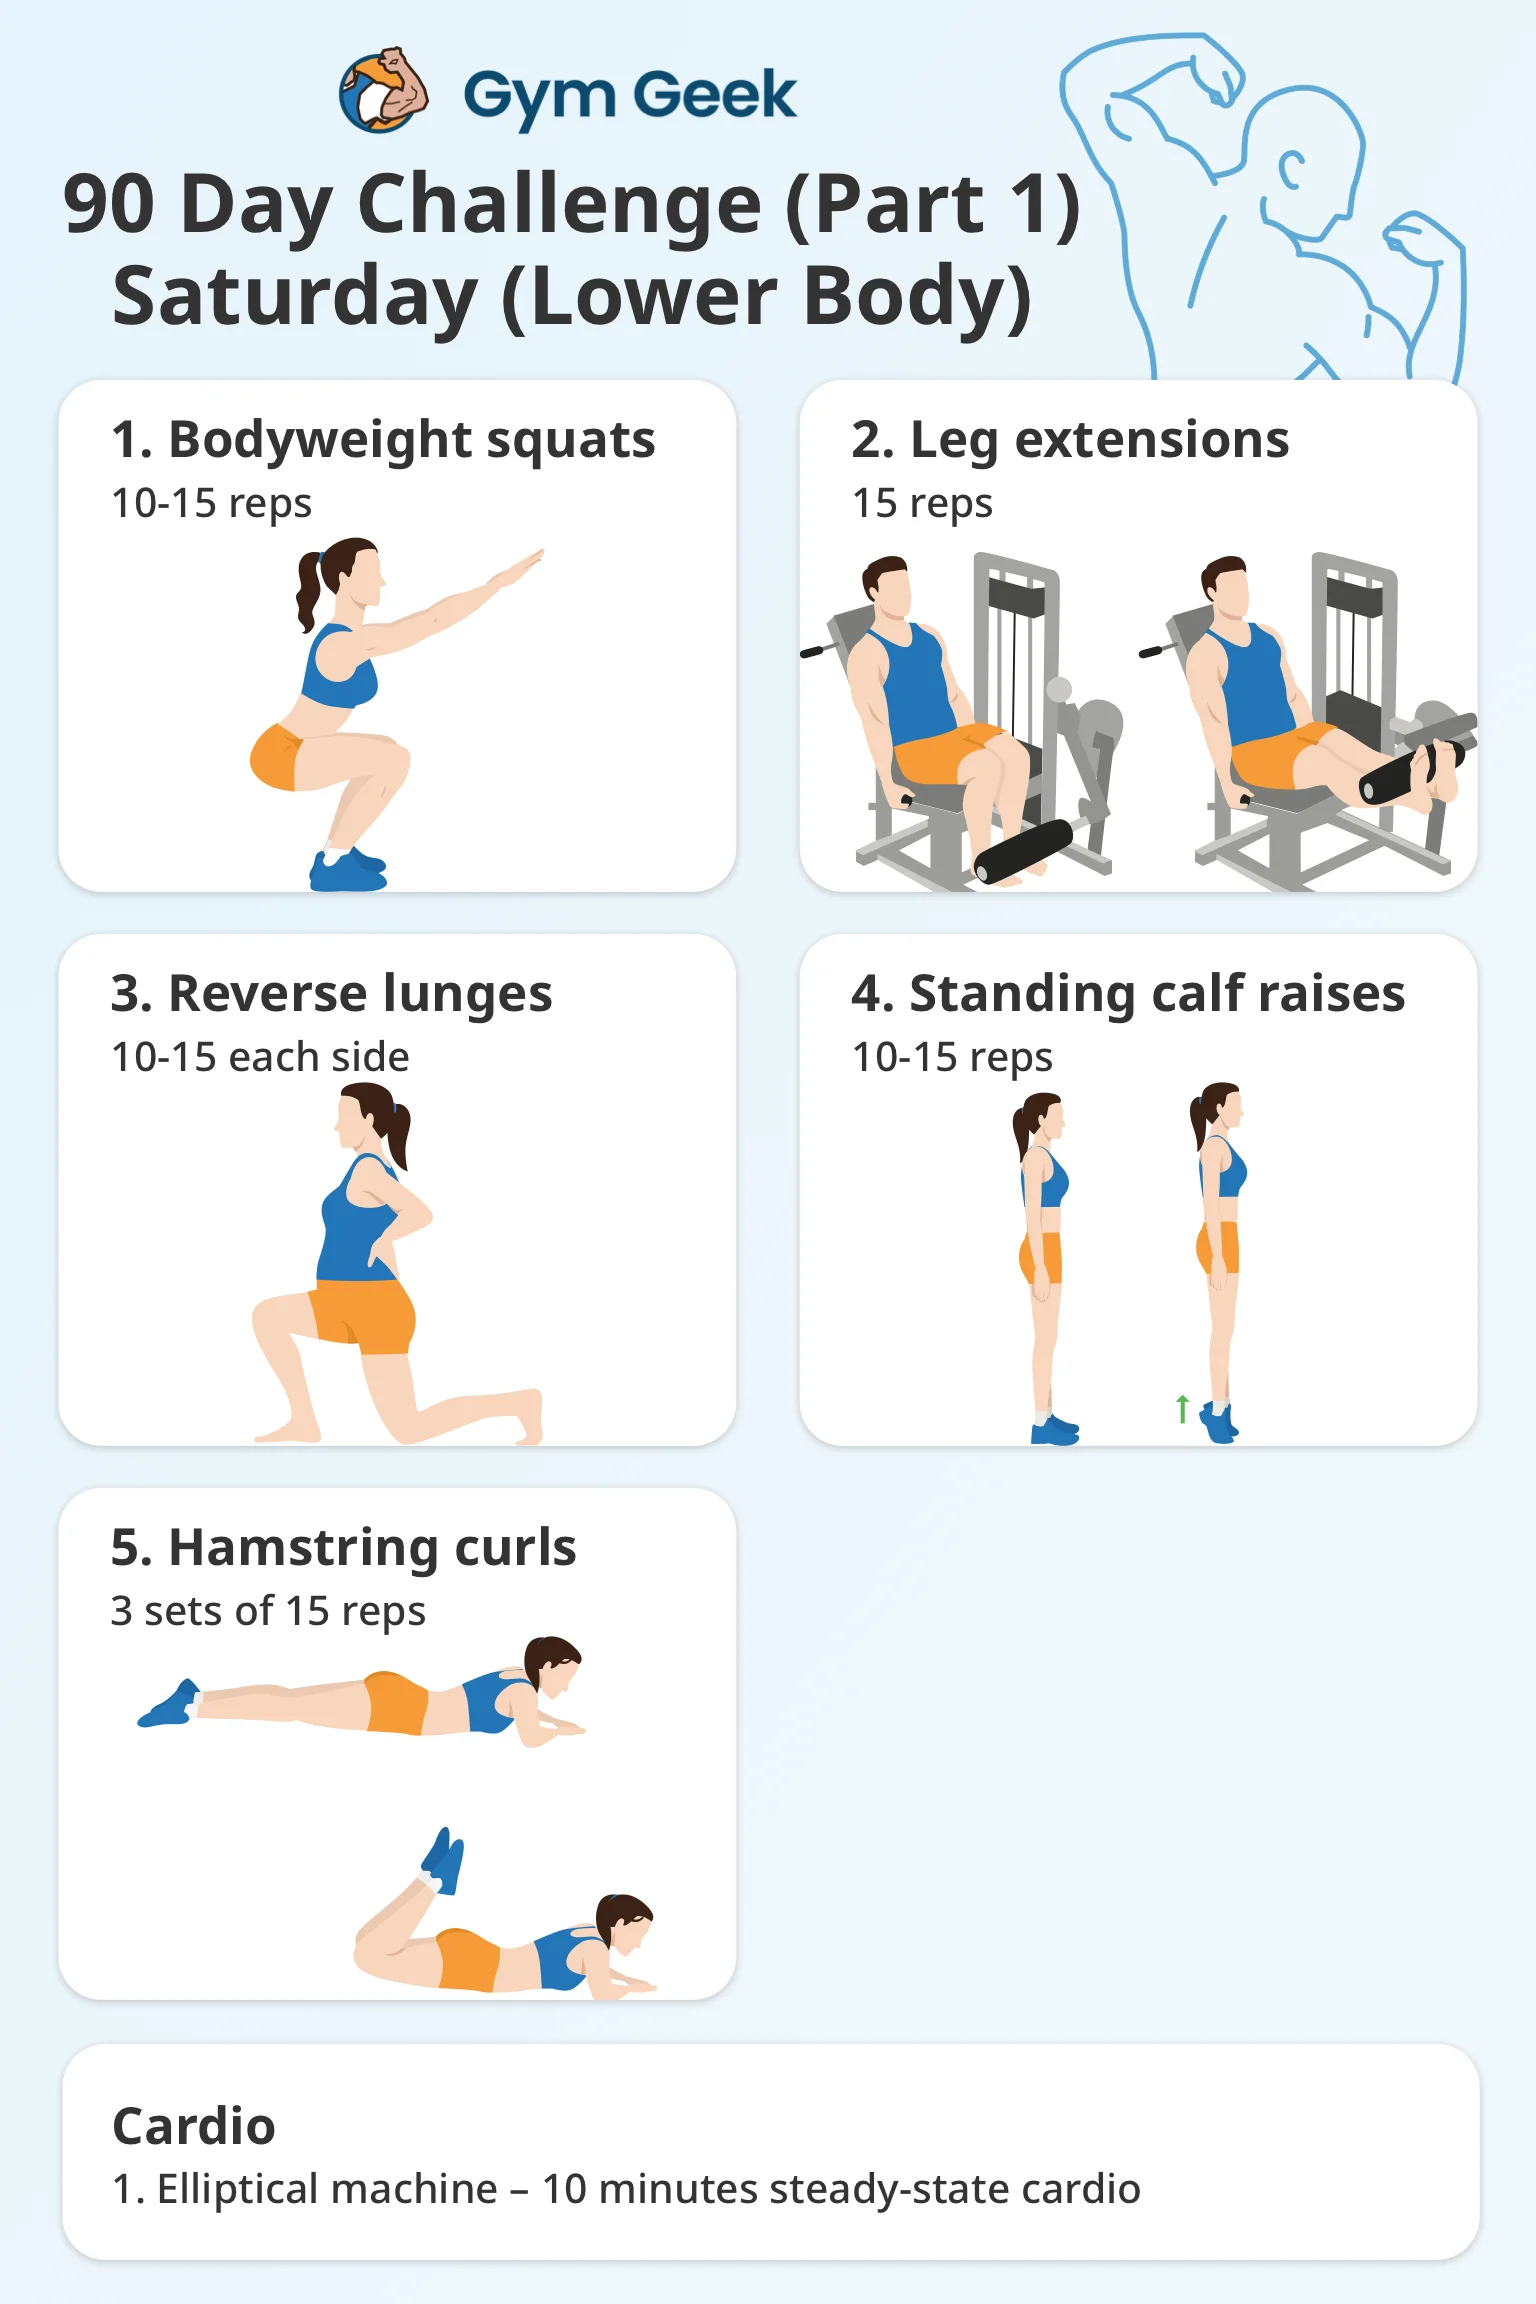 infographic - 90 day workout challenge, stage 1, Saturday (Lower Body)